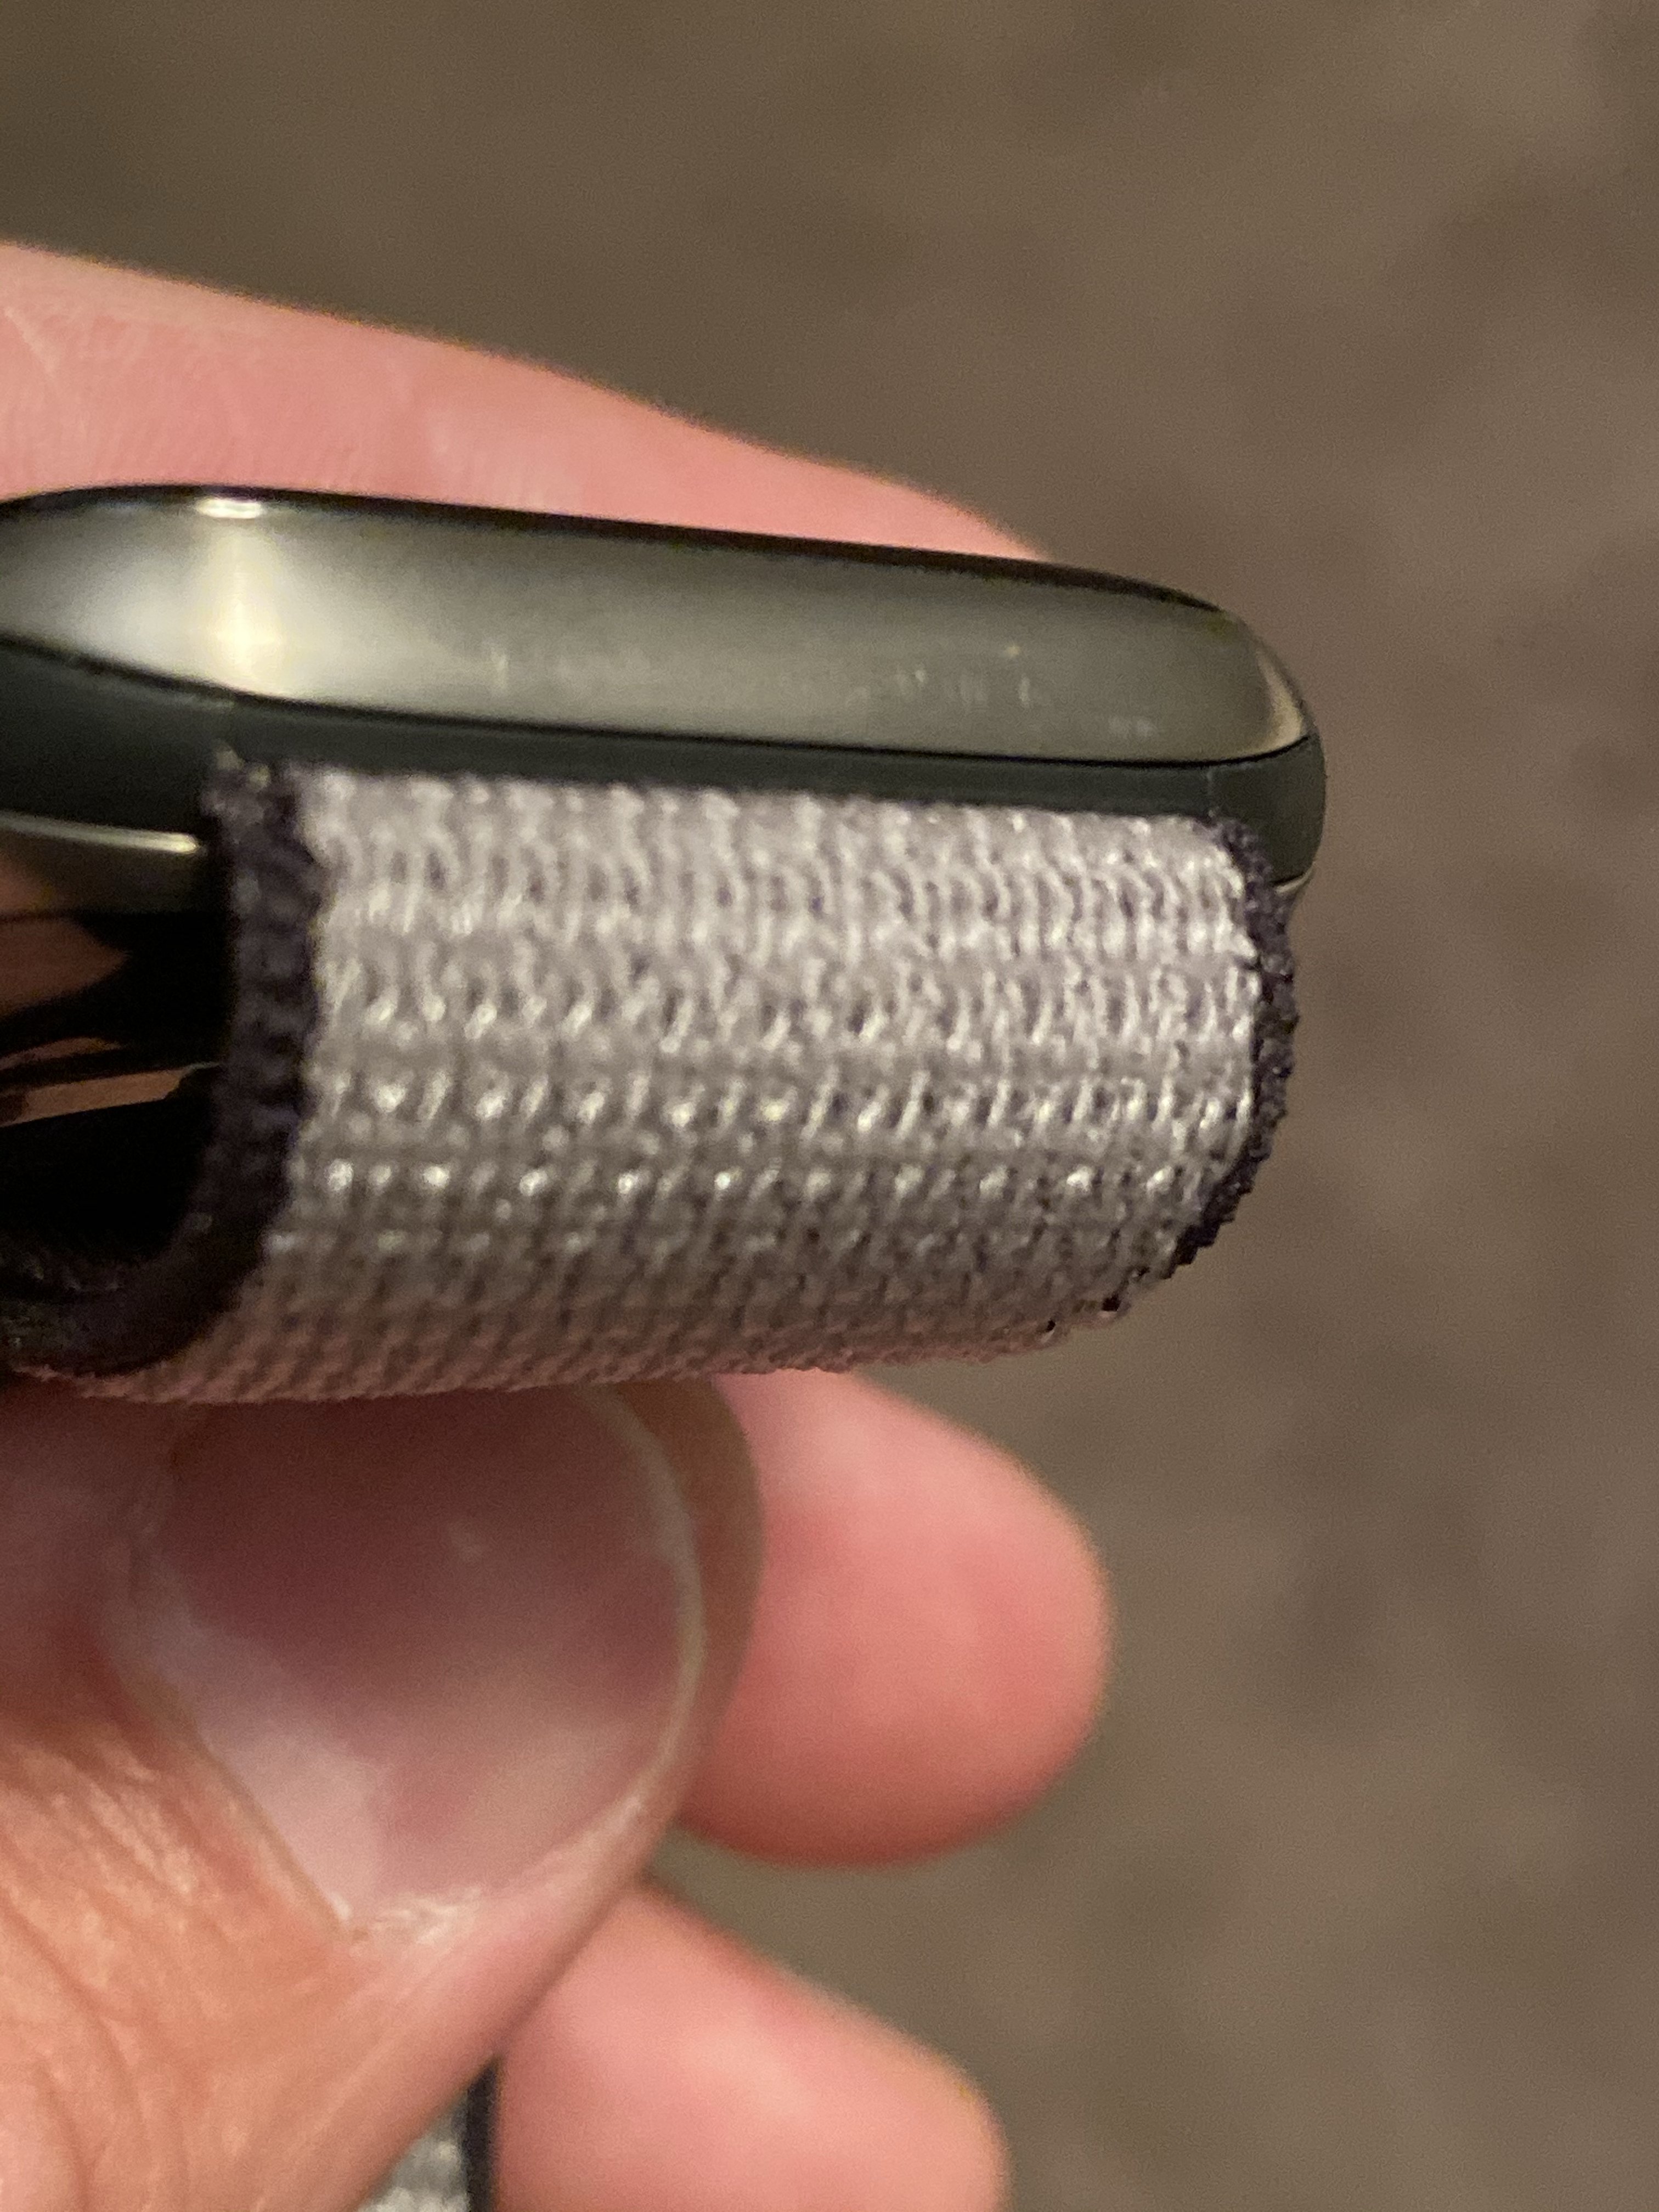 Tips for how to remove scratches on an apple watch